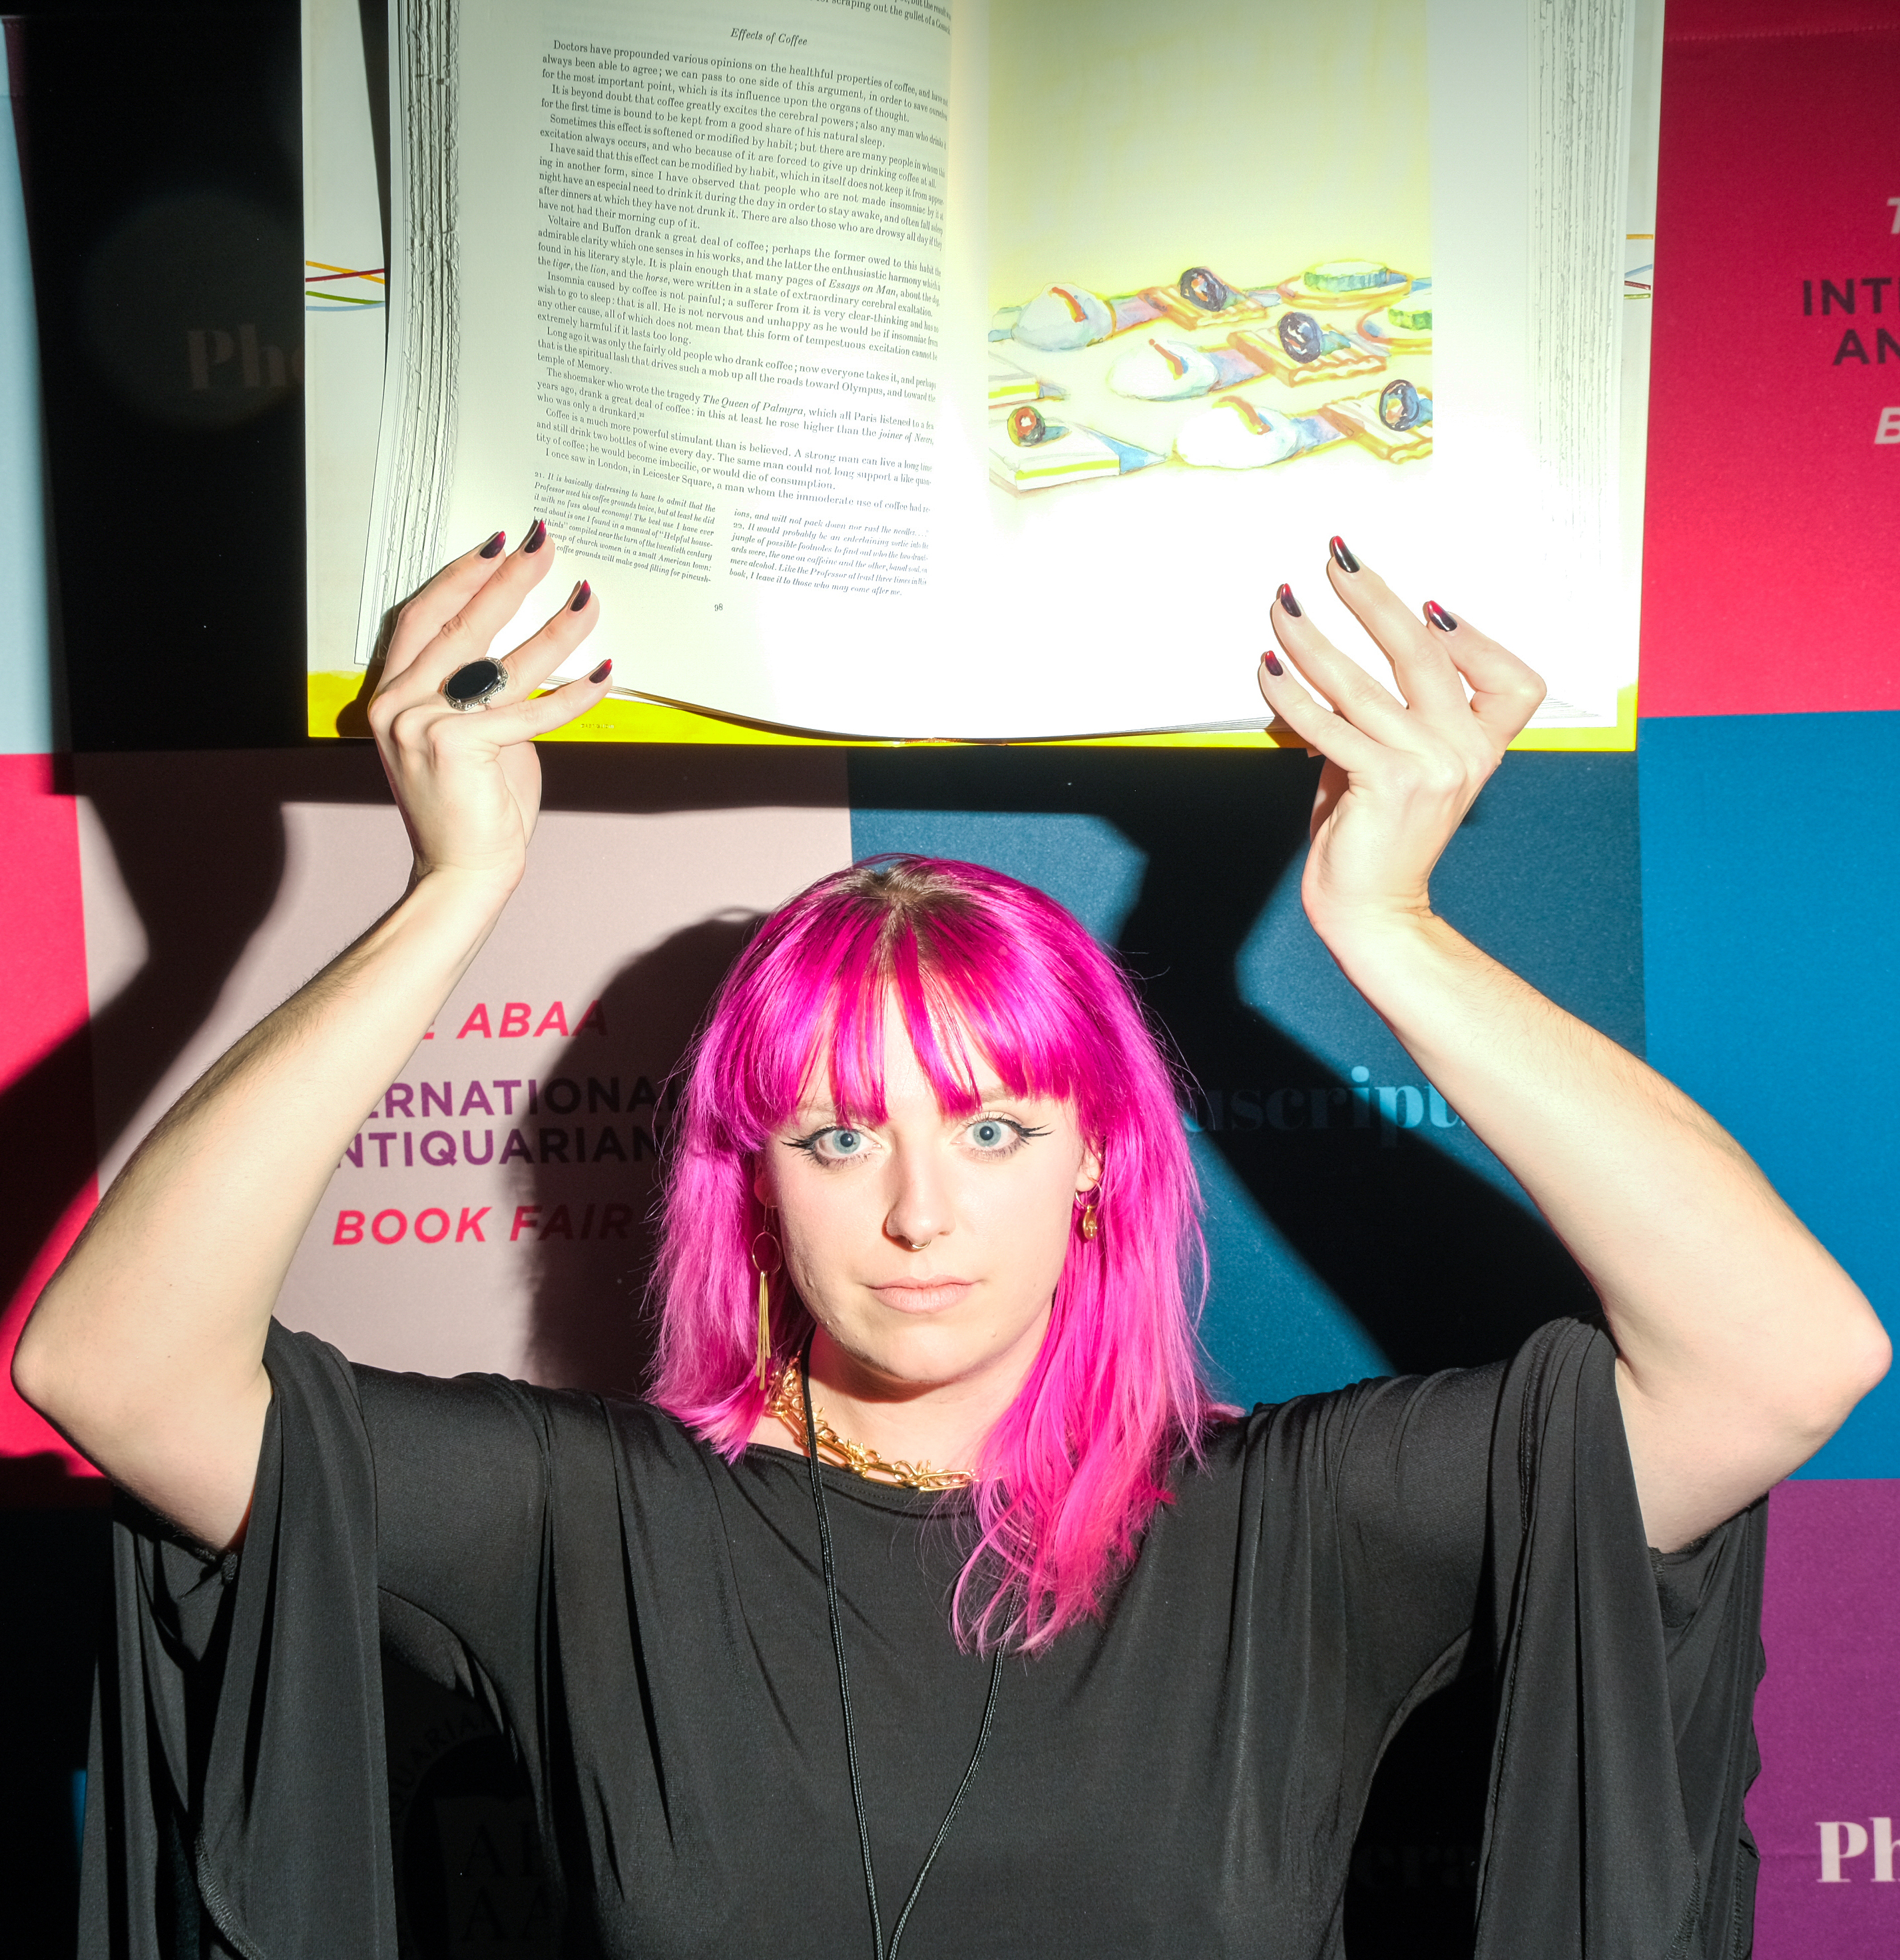 A person with bright pink hair holds open a book on a colorful, abstract background.